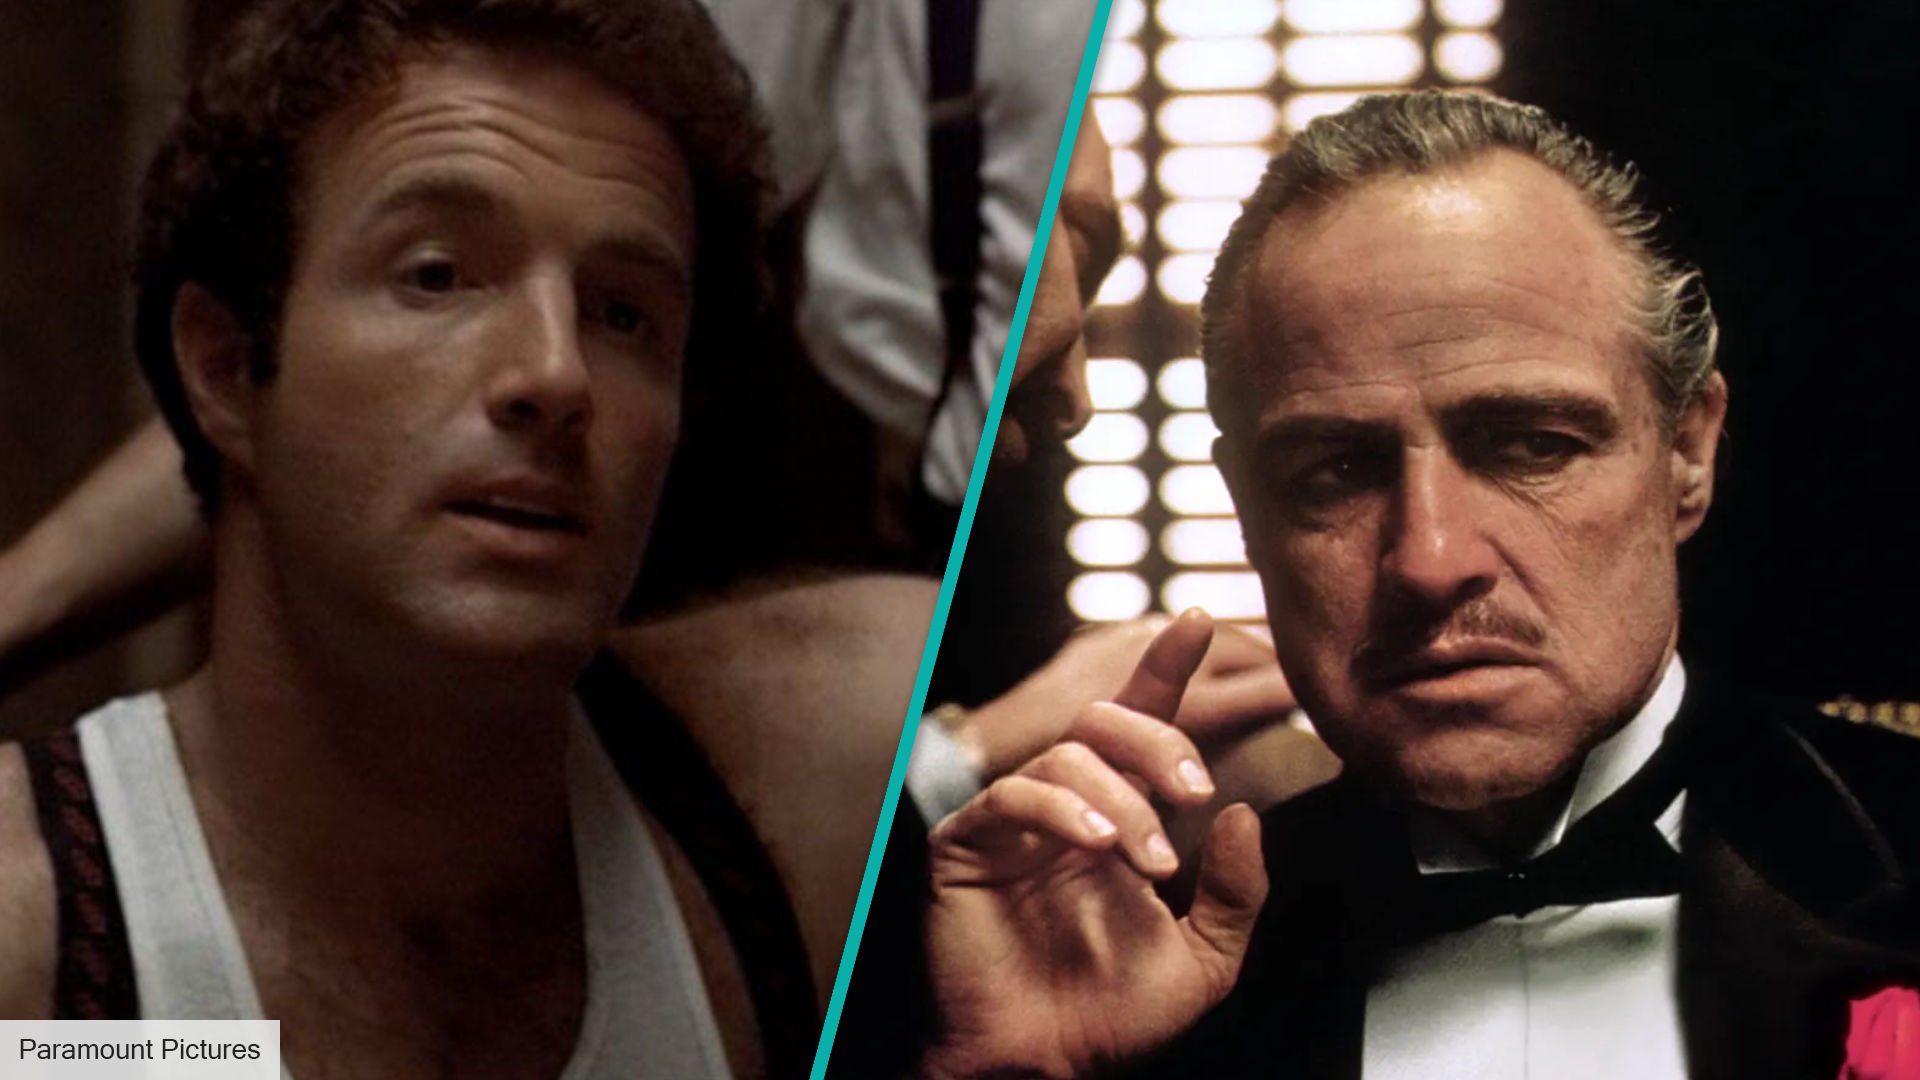 James Caan walked out of The Godfather after cut scene | The Digital Fix